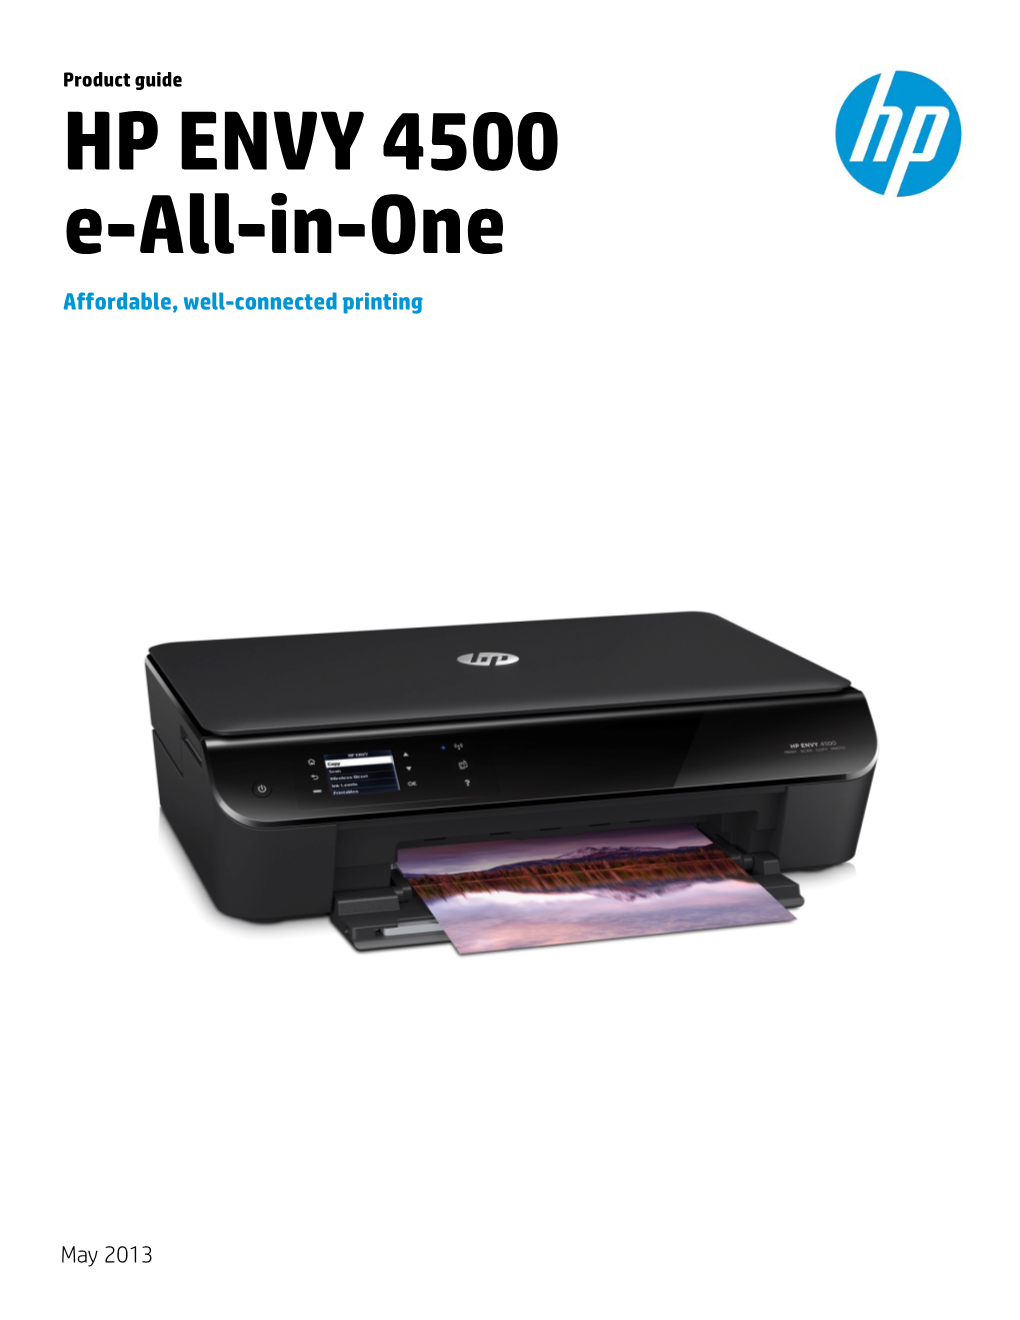 HP ENVY 4500 E-All-In-One Affordable, Well-Connected Printing